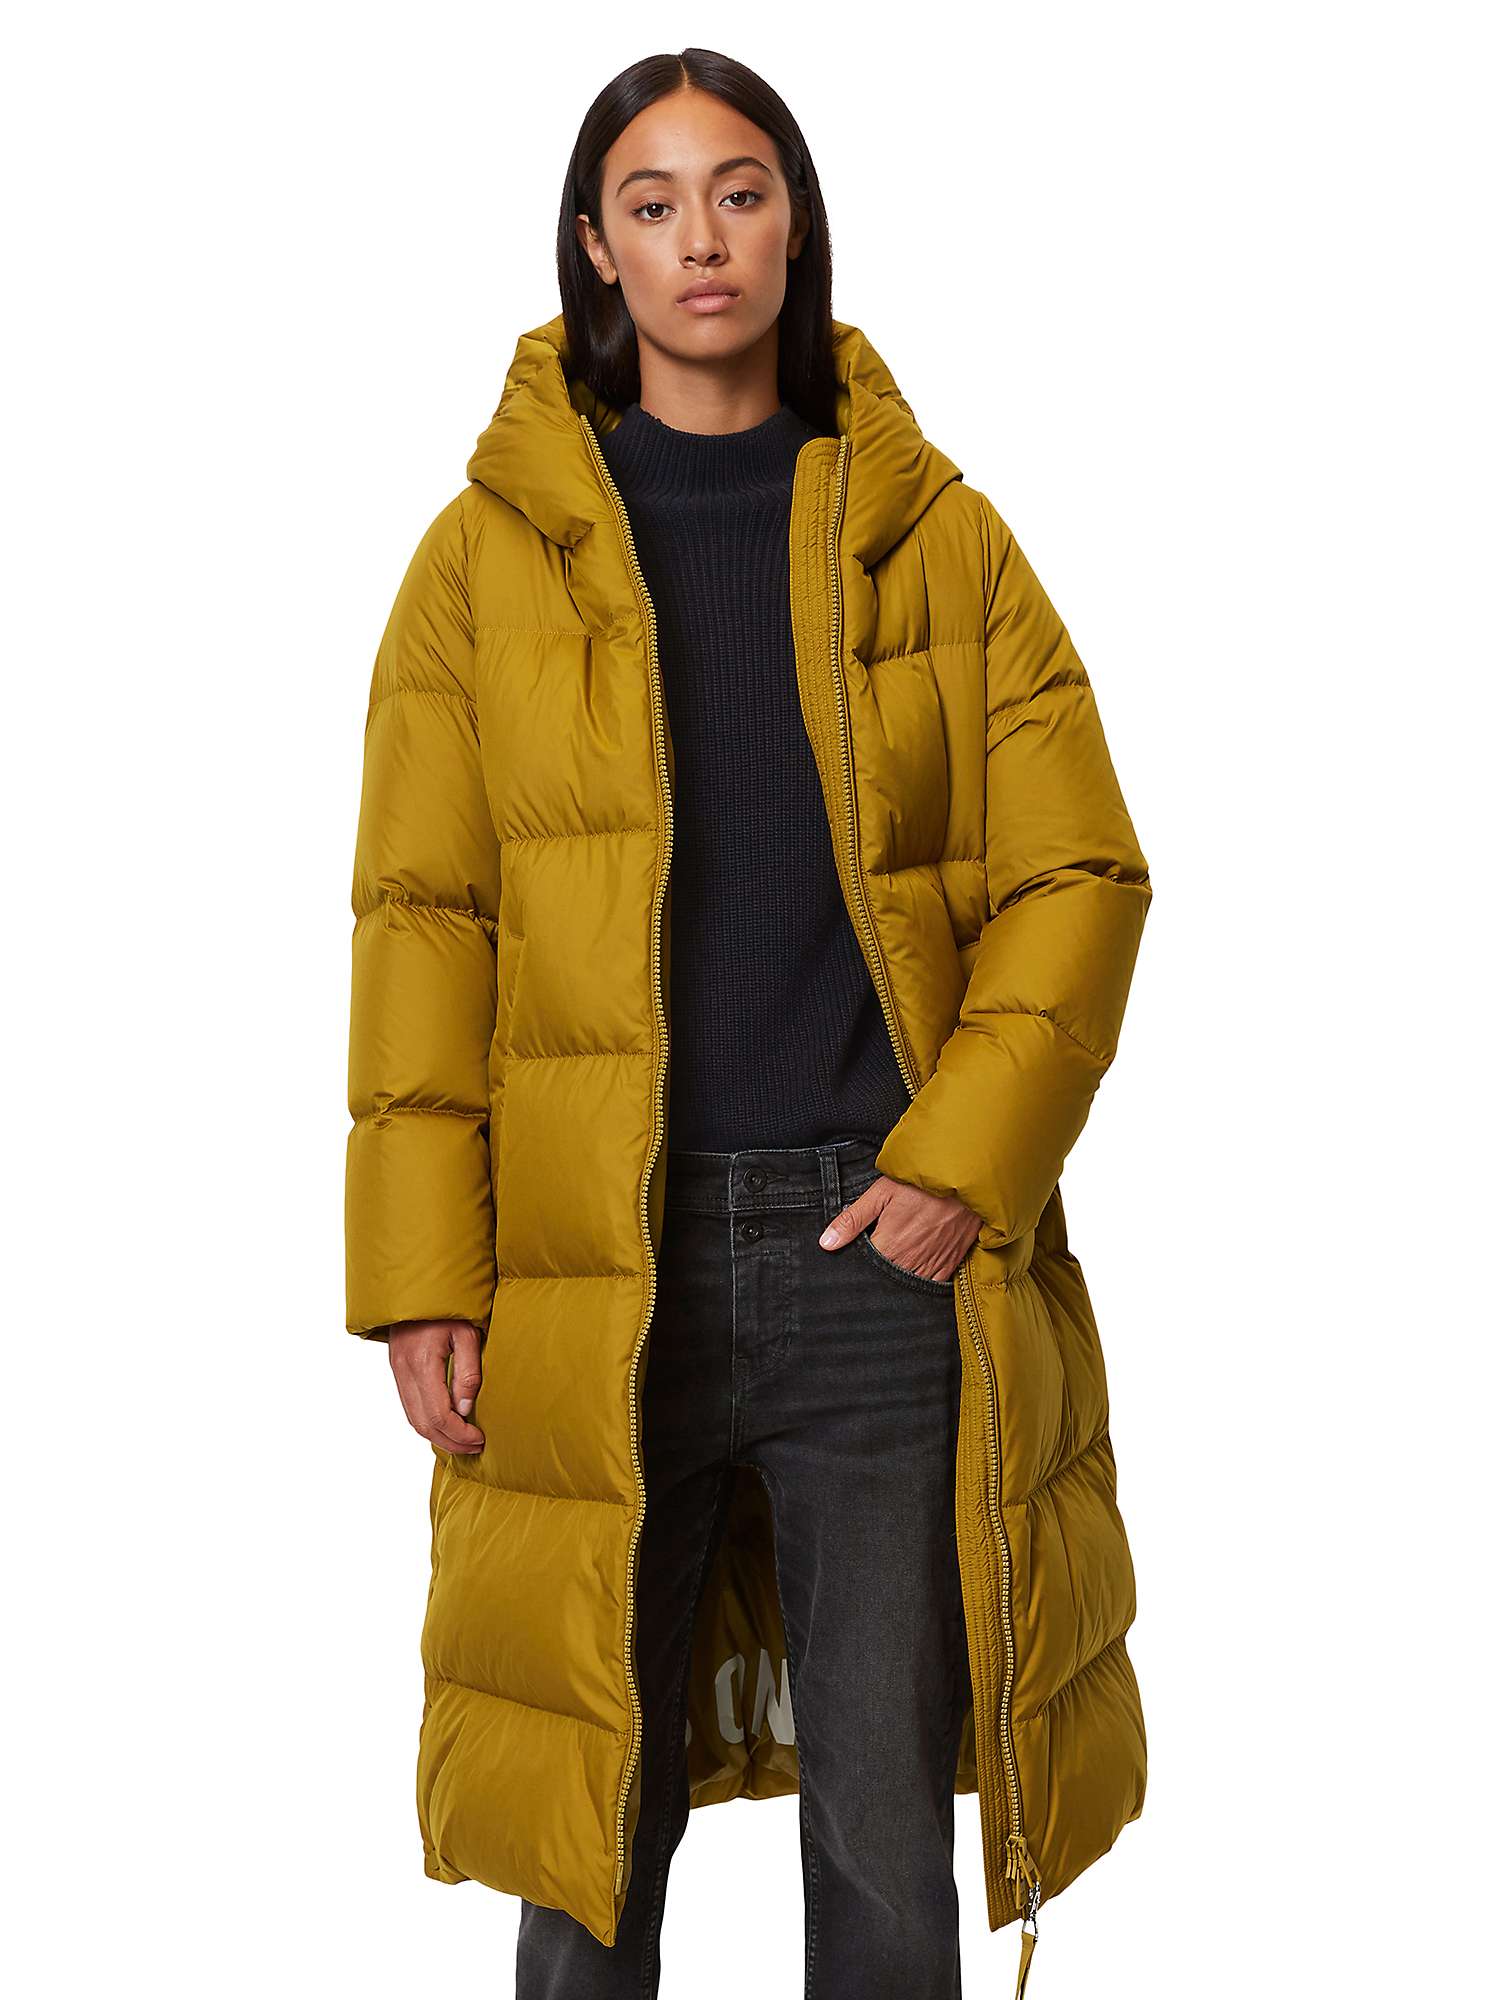 Buy Marc O'Polo Puffer Coat Online at johnlewis.com